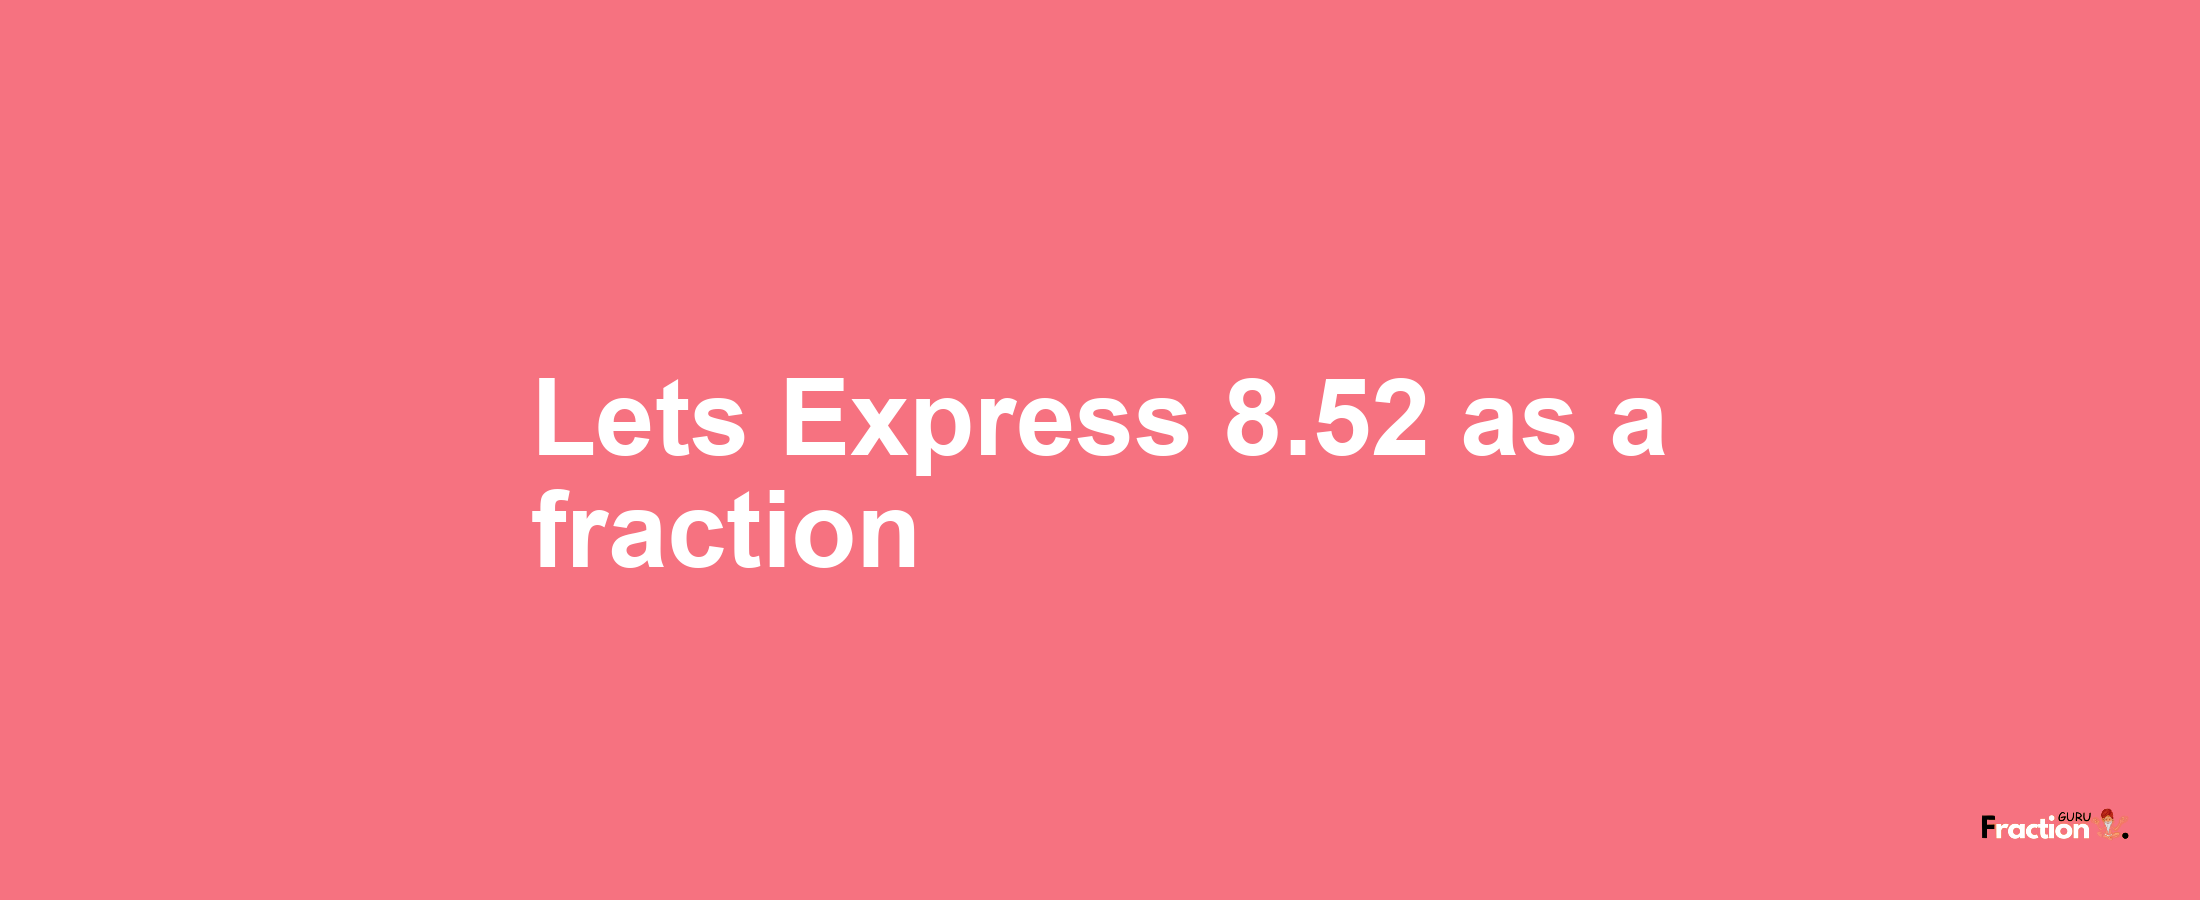 Lets Express 8.52 as afraction